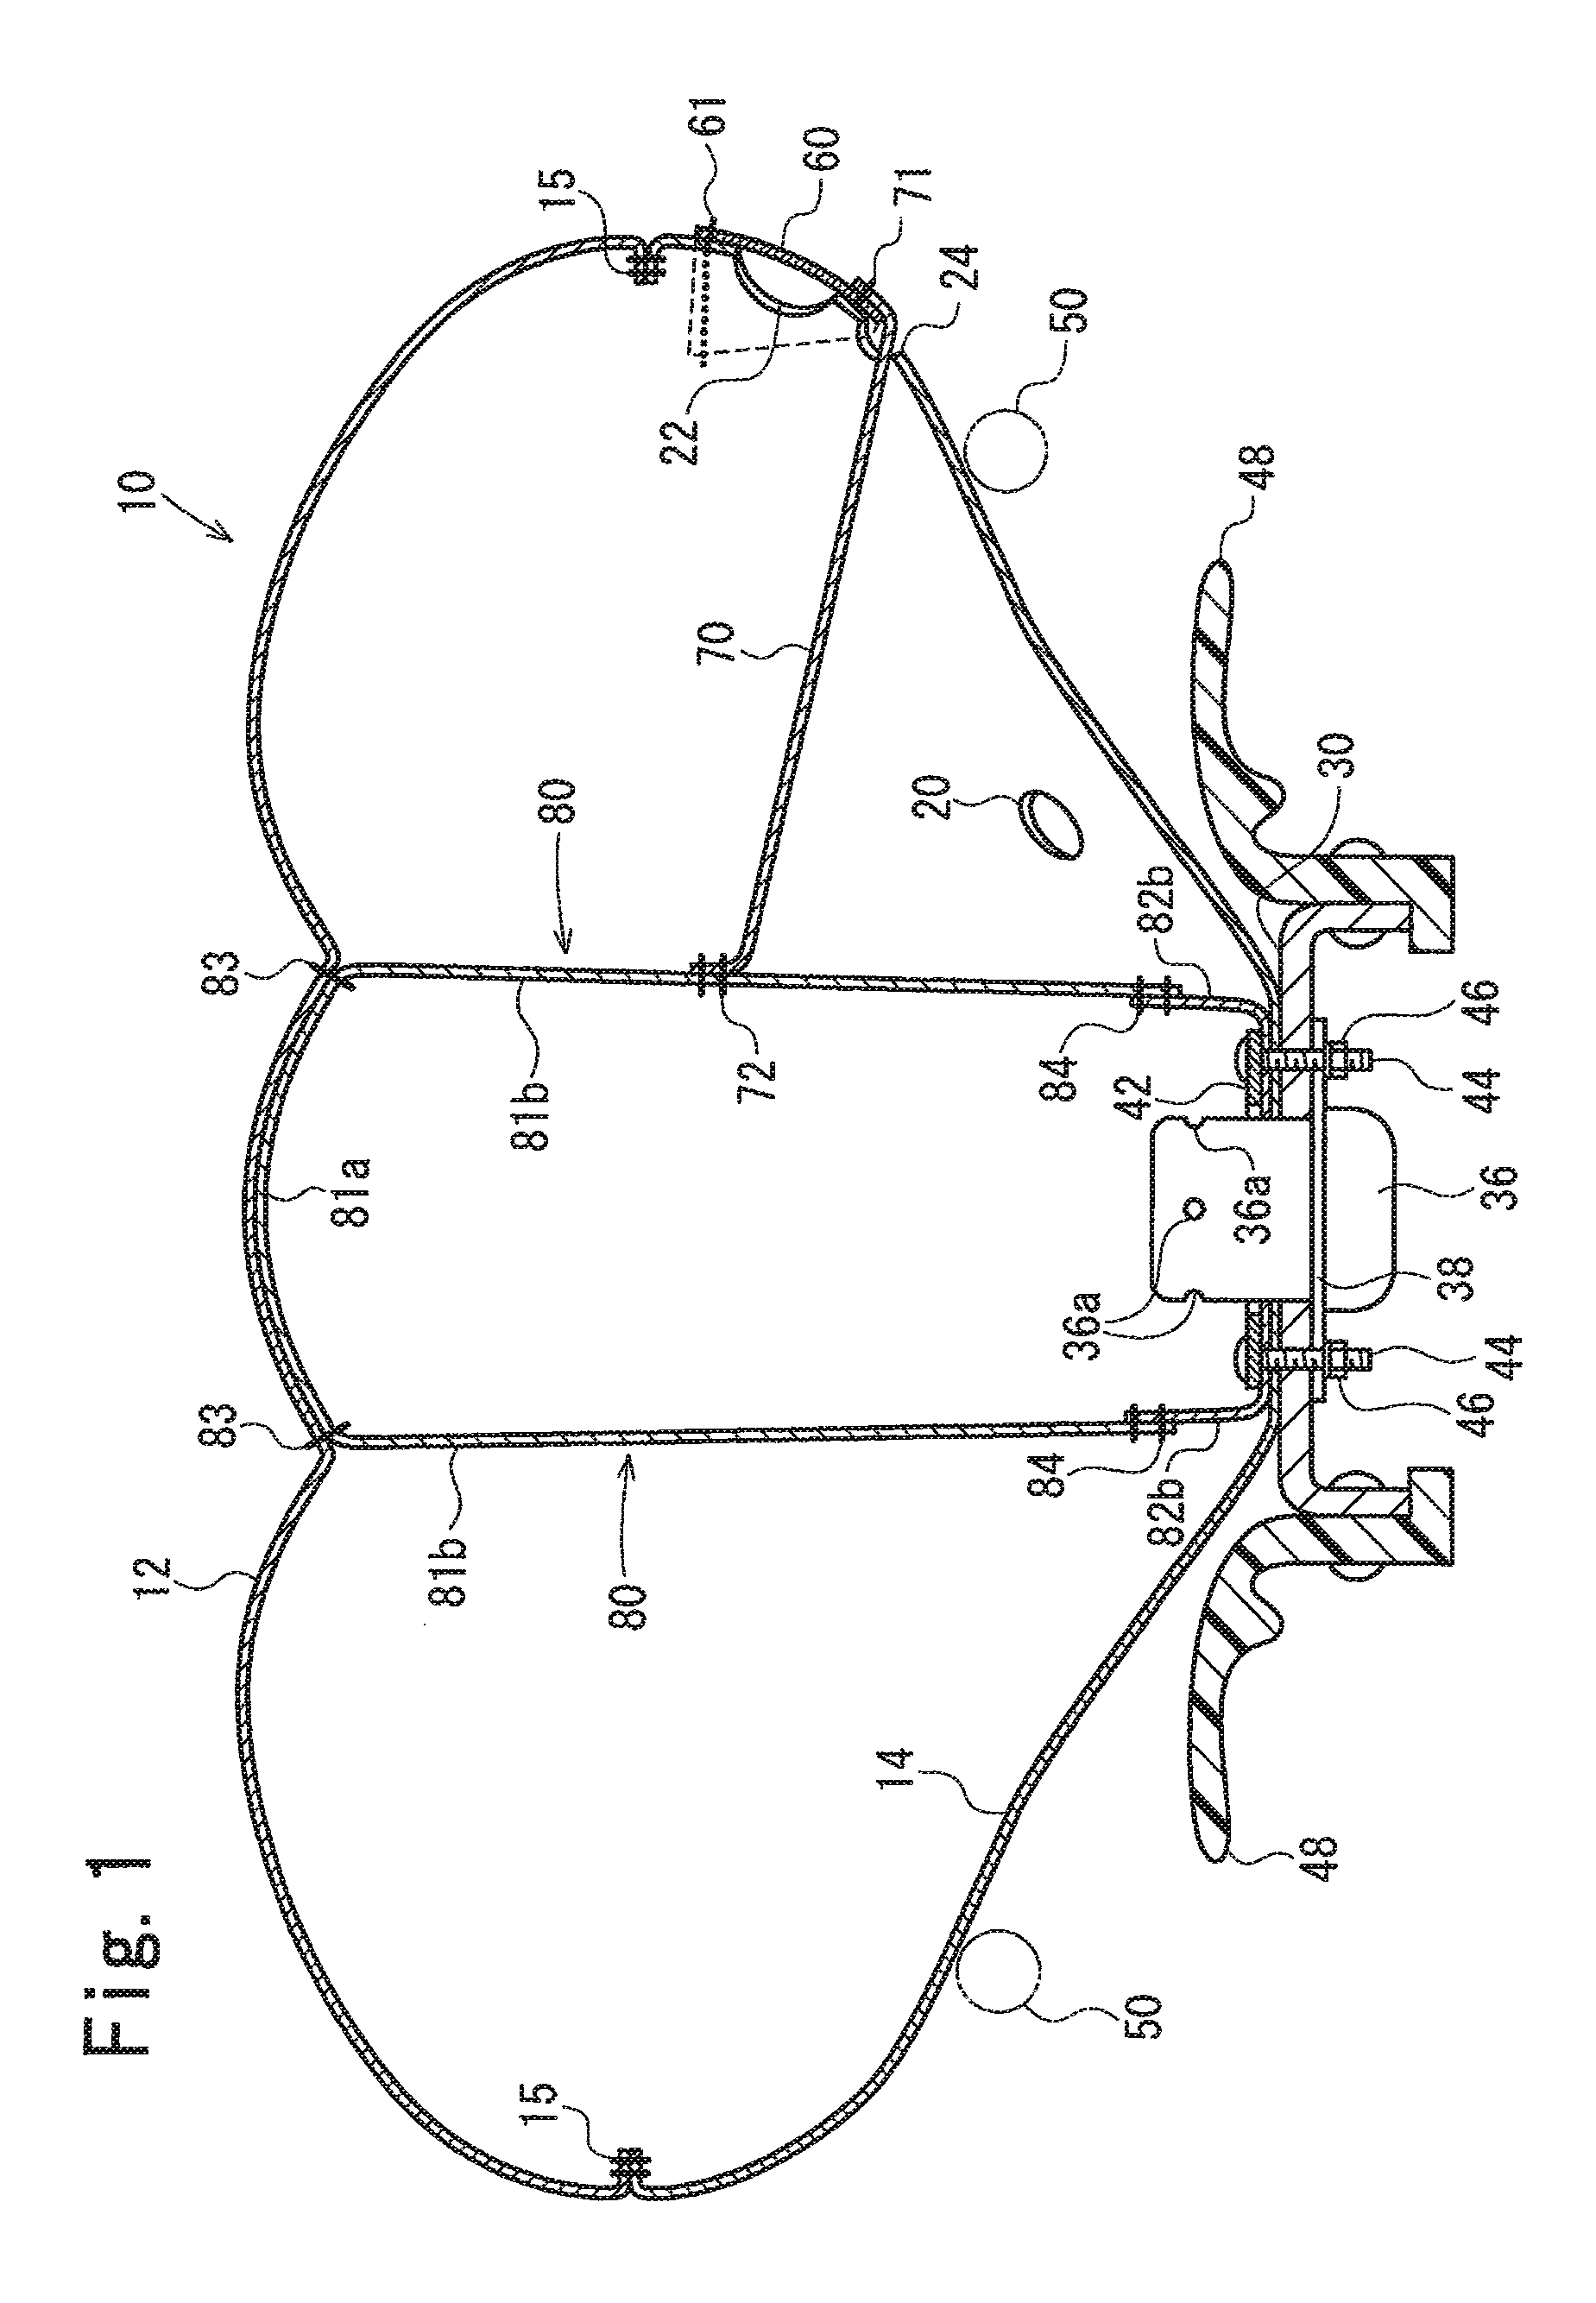 Airbag and airbag apparatus